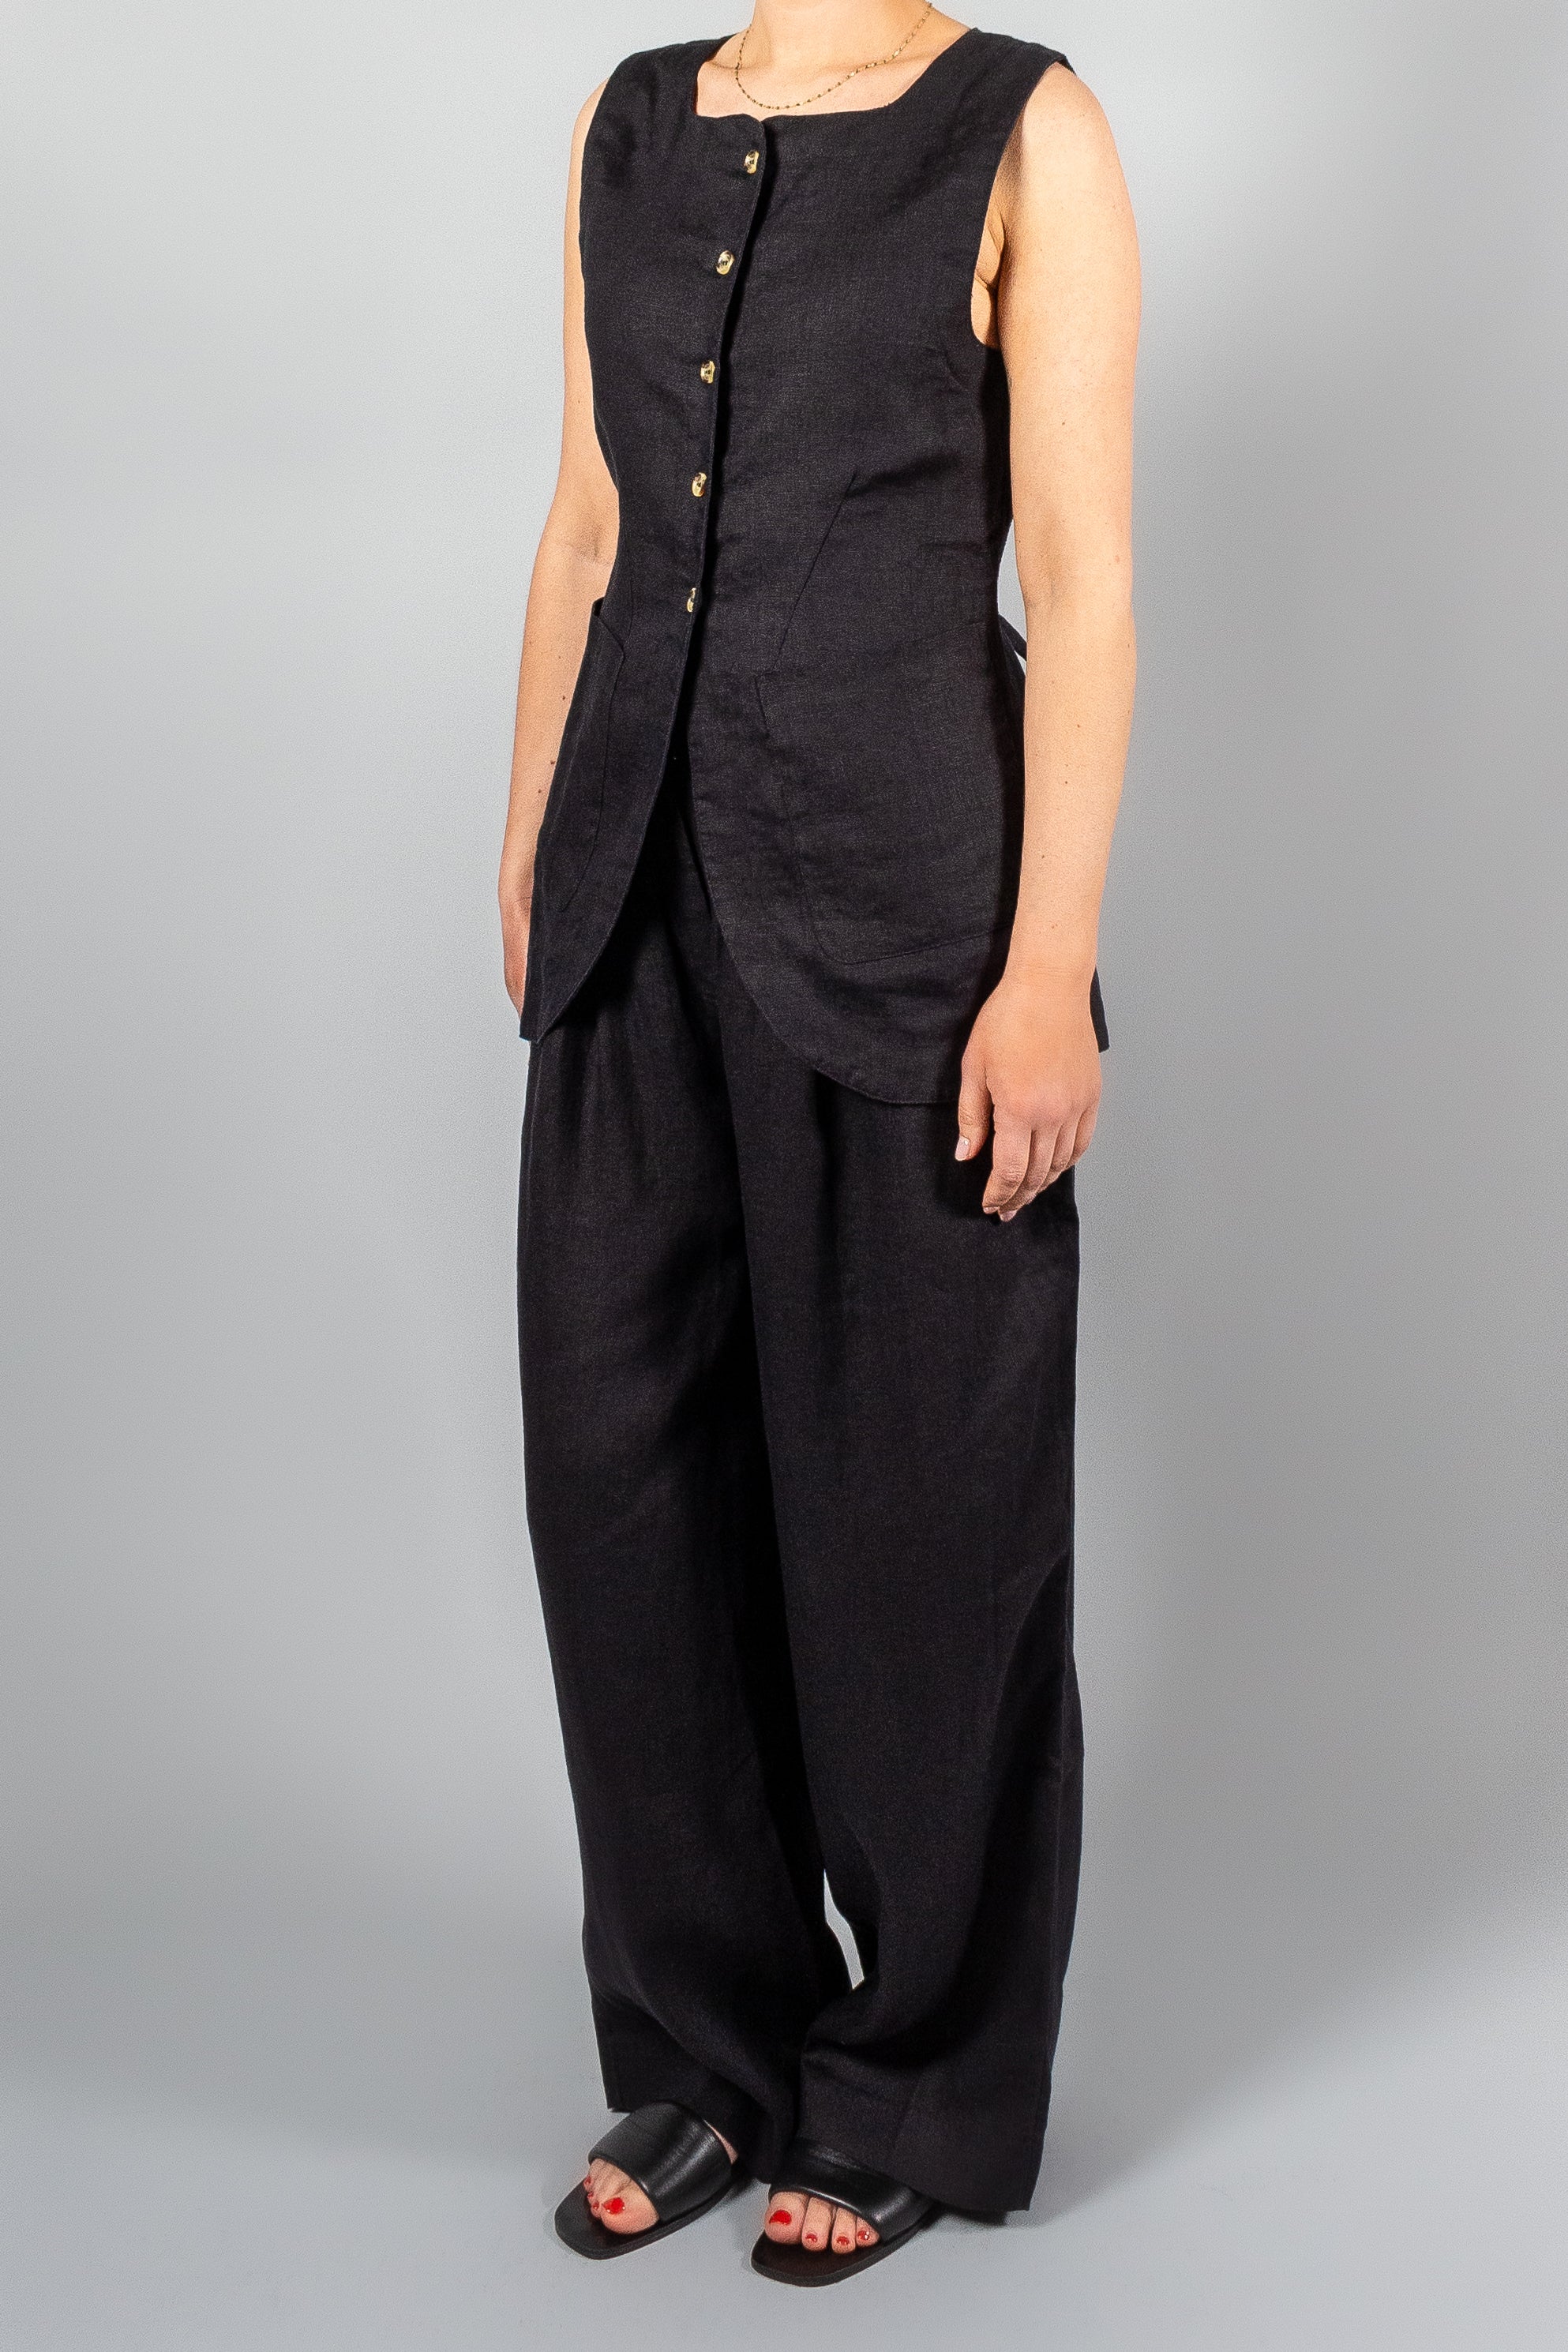 Posse Wyatt Trouser-Pants and Shorts-Misch-Boutique-Vancouver-Canada-misch.ca